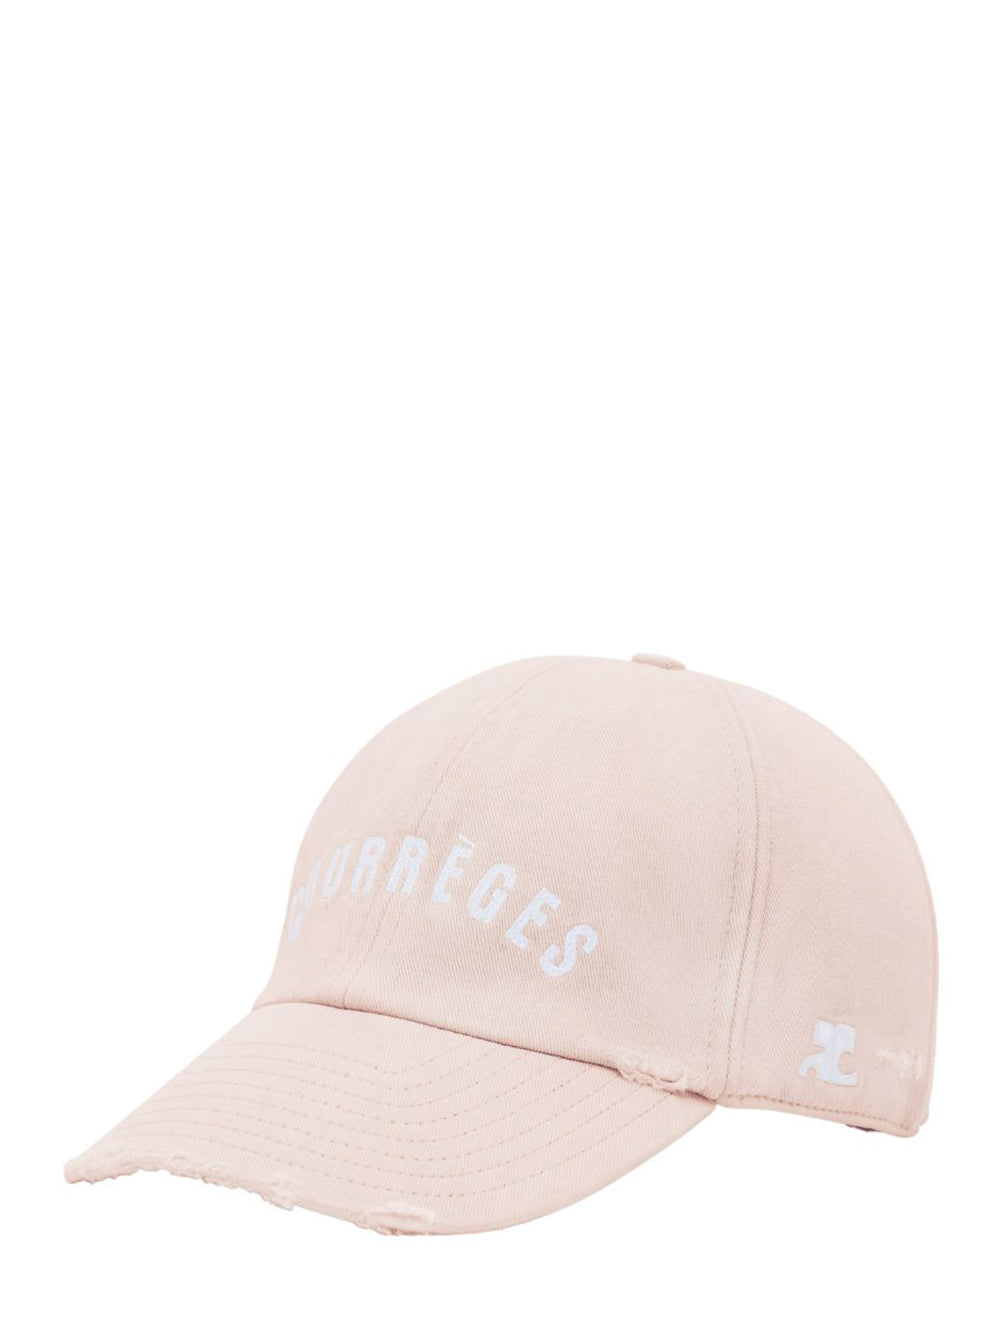 AC Embroidered Washed Cap (Oatmeal)